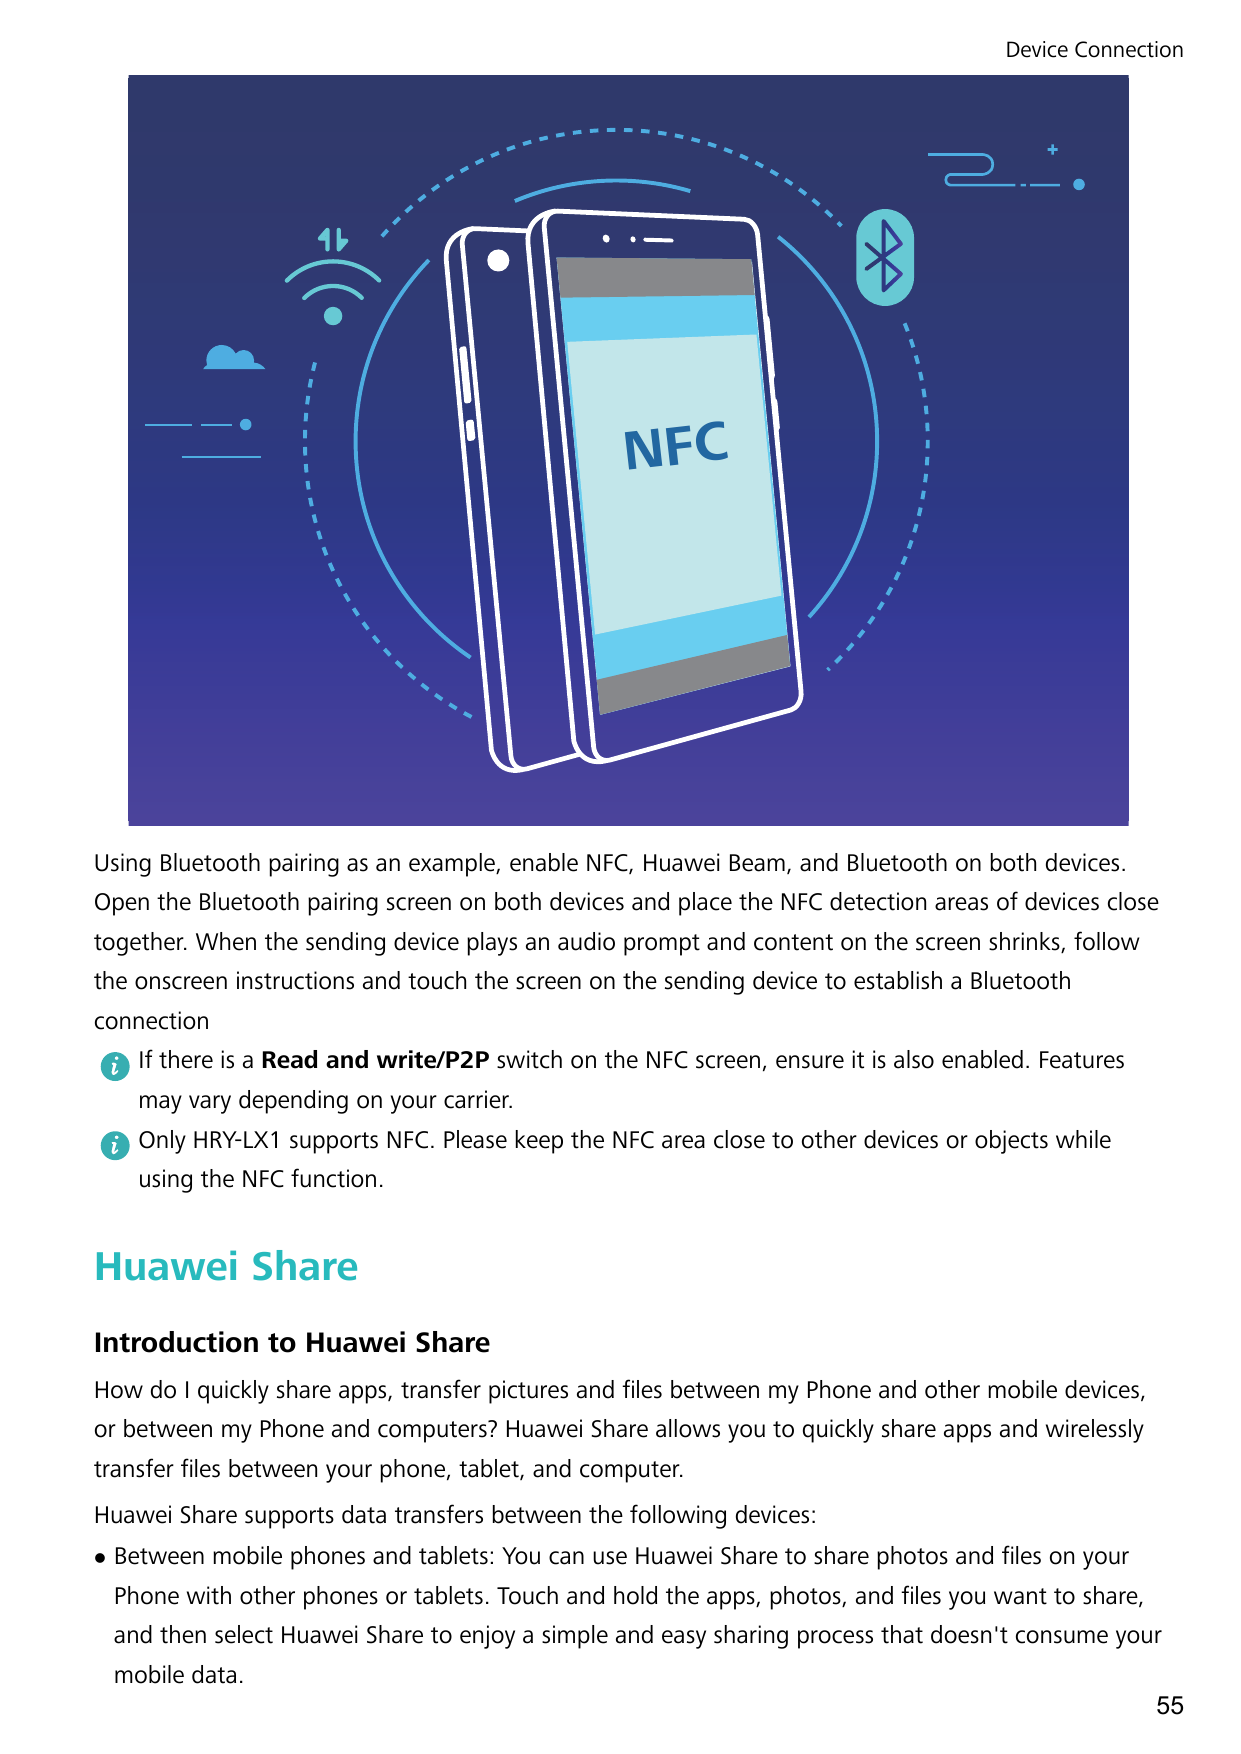 Device ConnectionNFCUsing Bluetooth pairing as an example, enable NFC, Huawei Beam, and Bluetooth on both devices.Open the Bluet